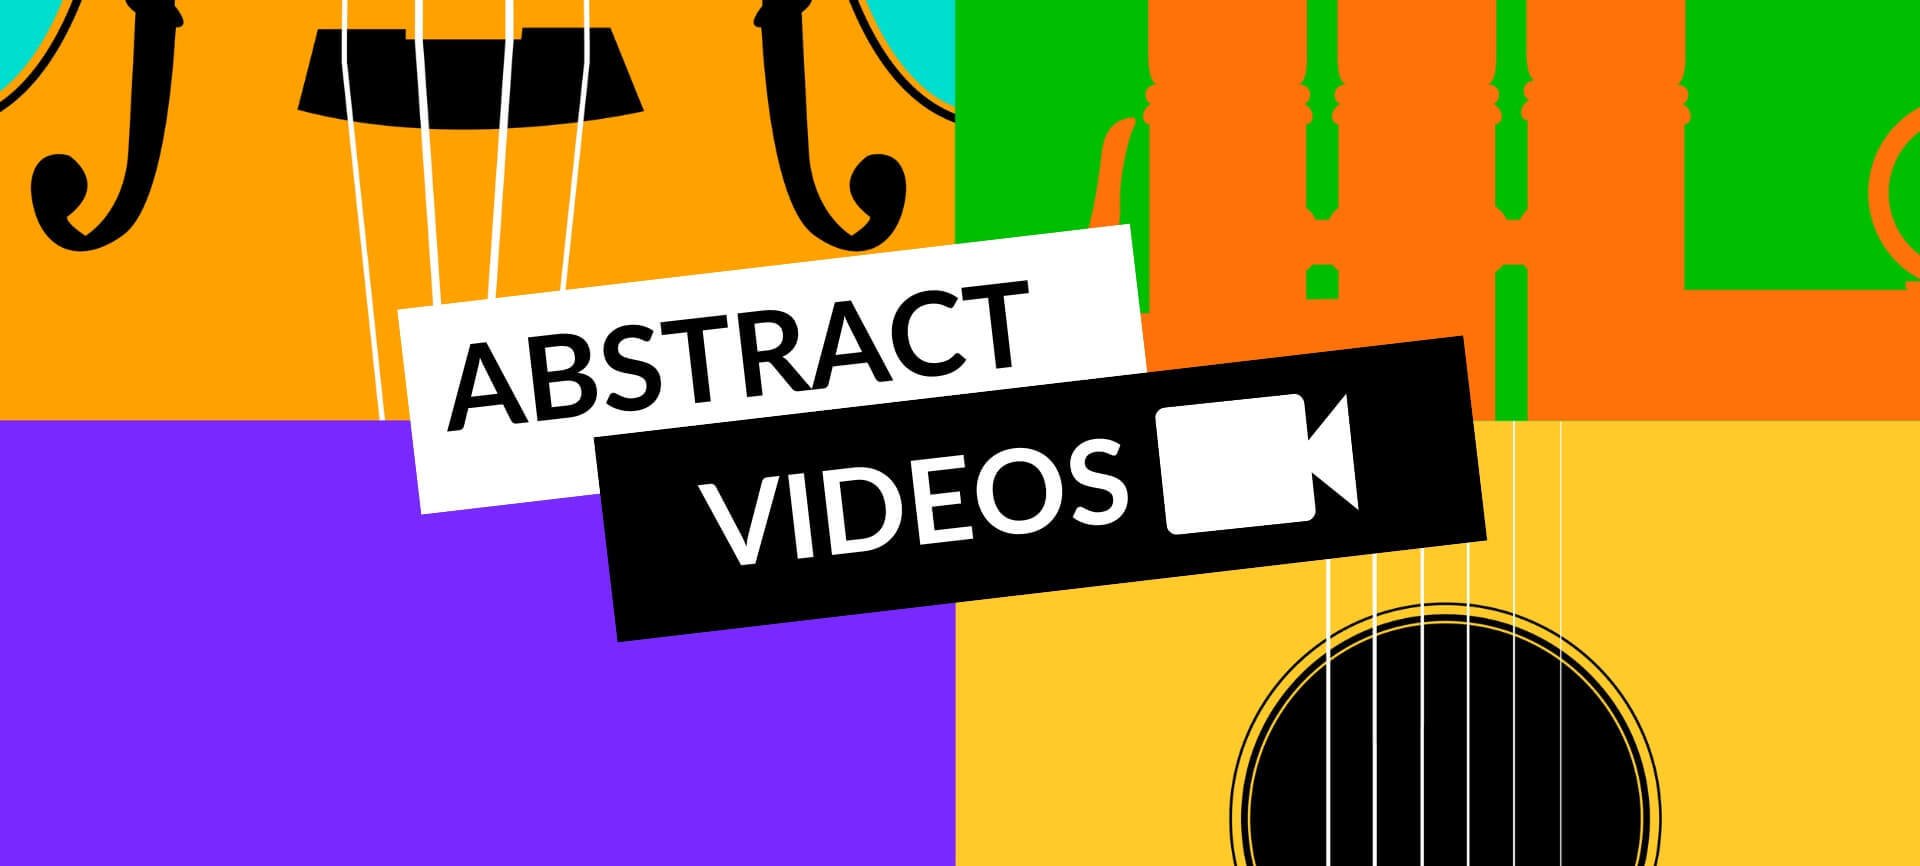 Abstract Videos | How to make music video by Jass Bianchi